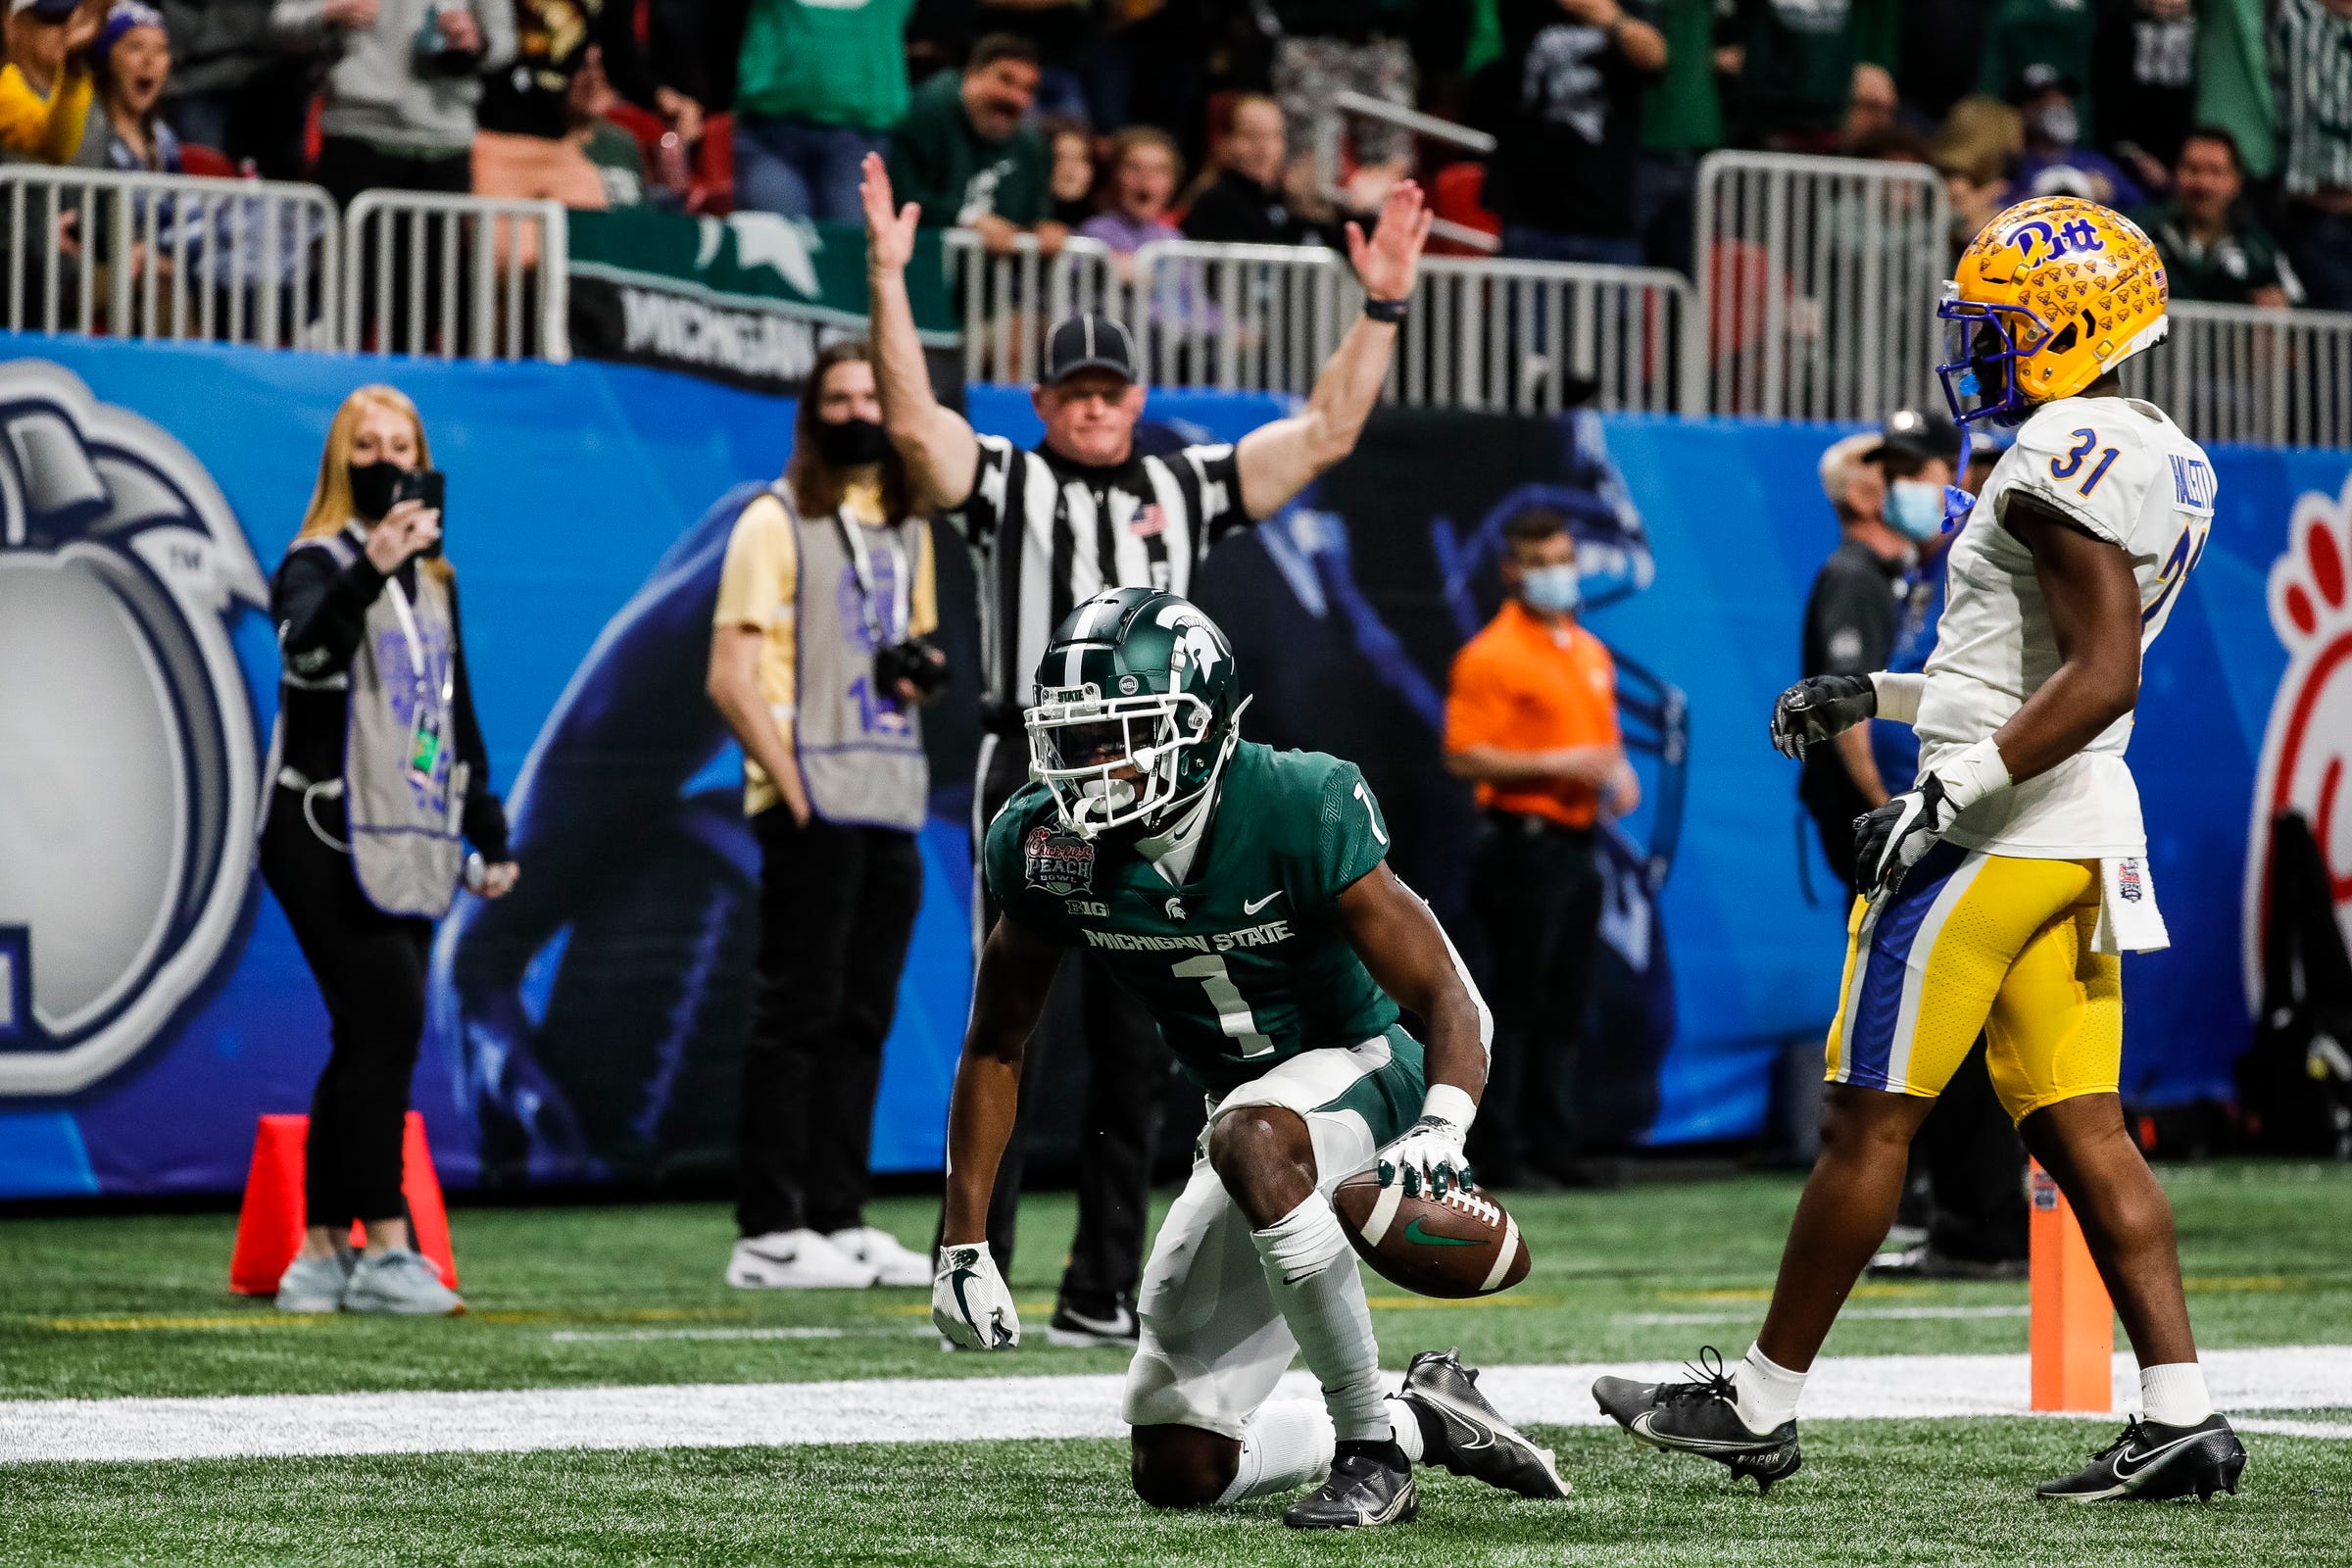 Michigan State Football player Jayden Reed catches a touchdown against the Pittsburgh Panthers in the Peach Bowl